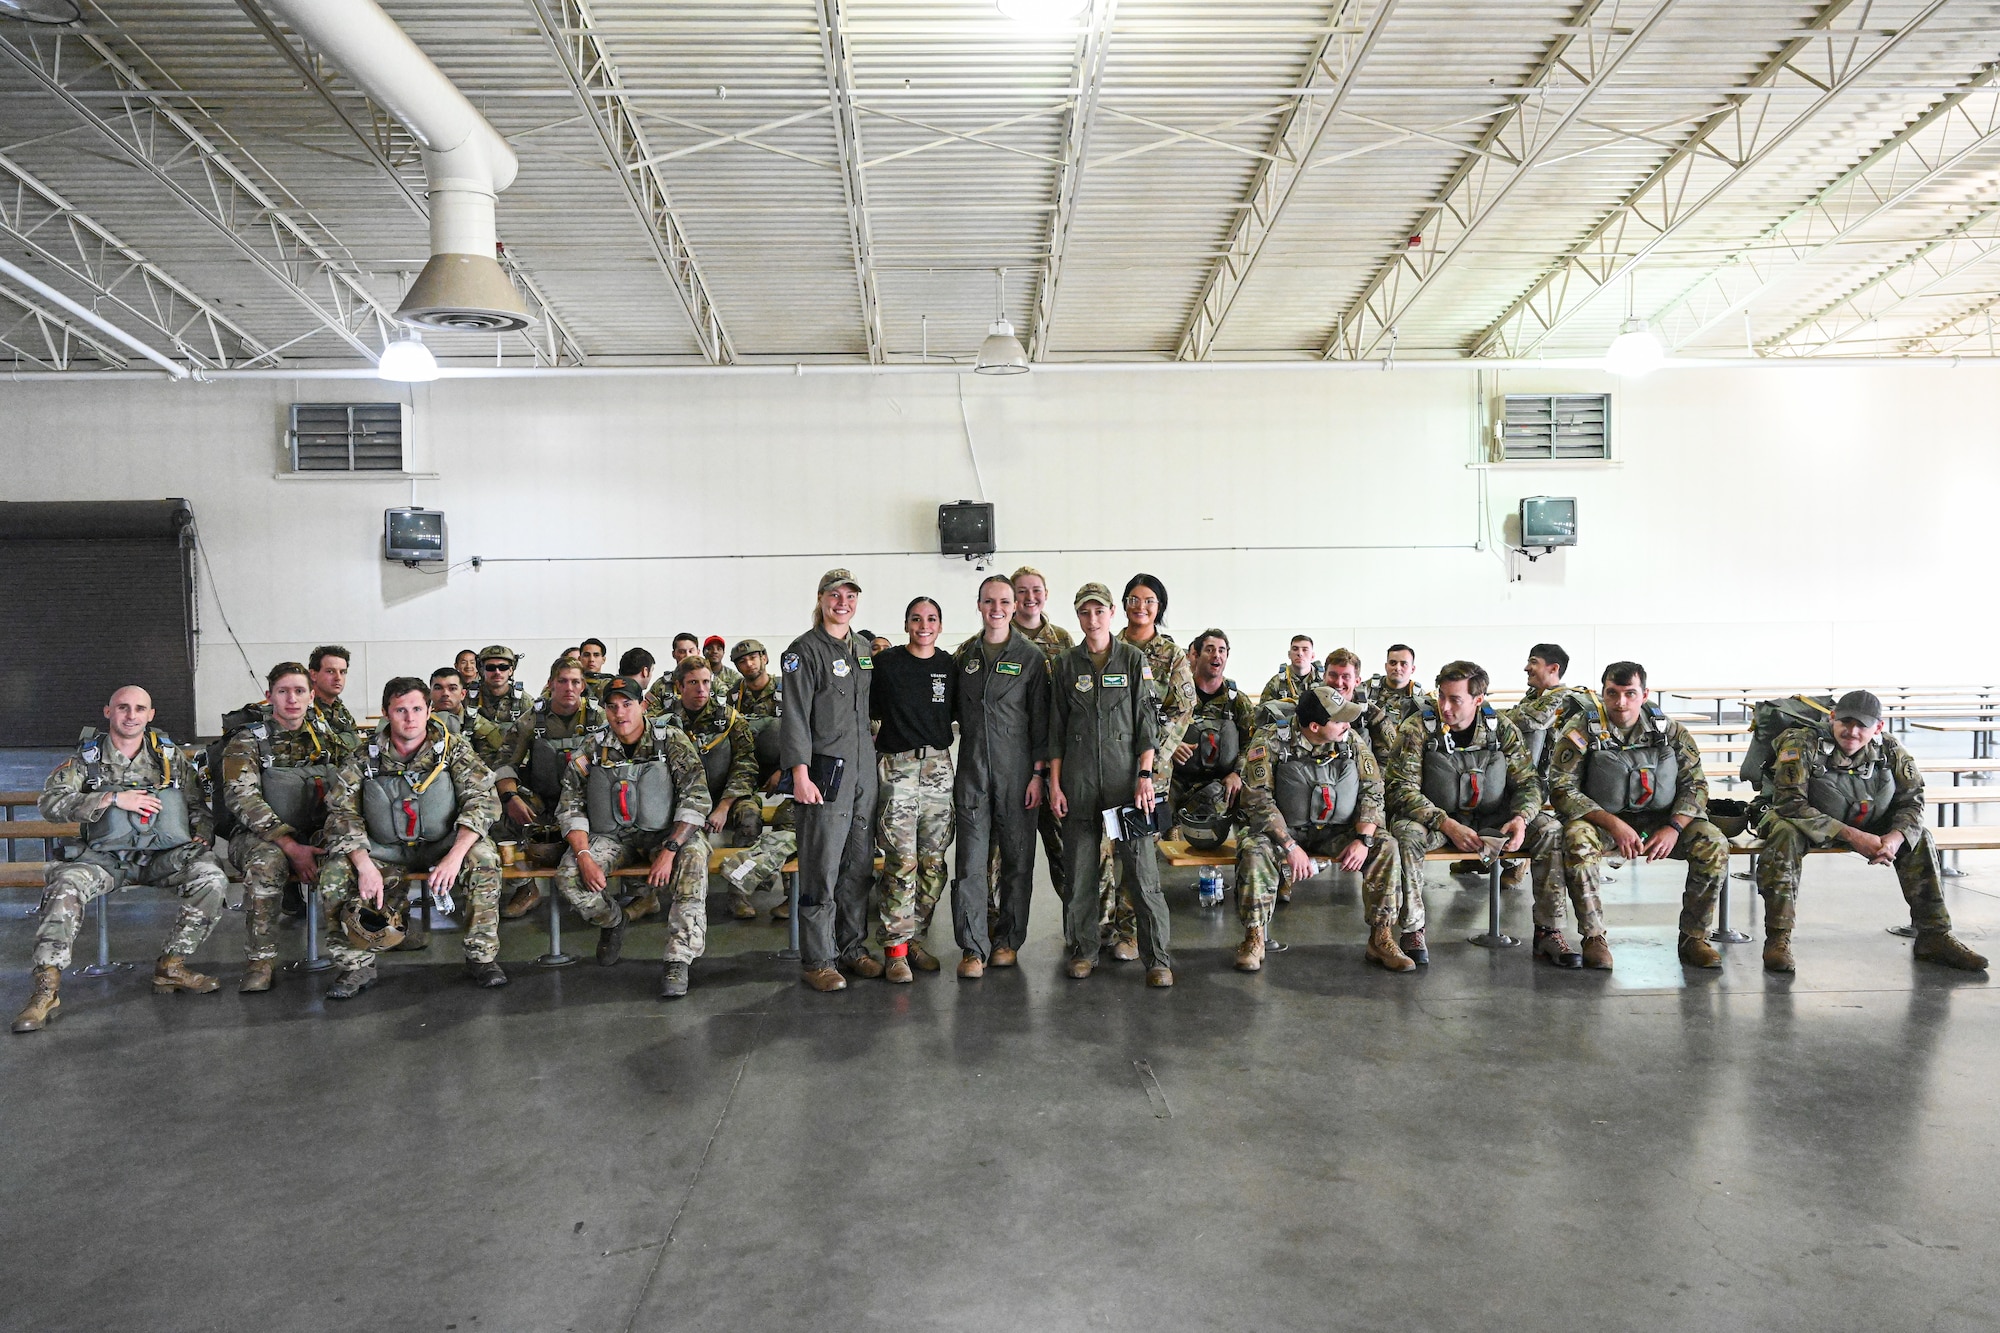 Service members pose for a photo.